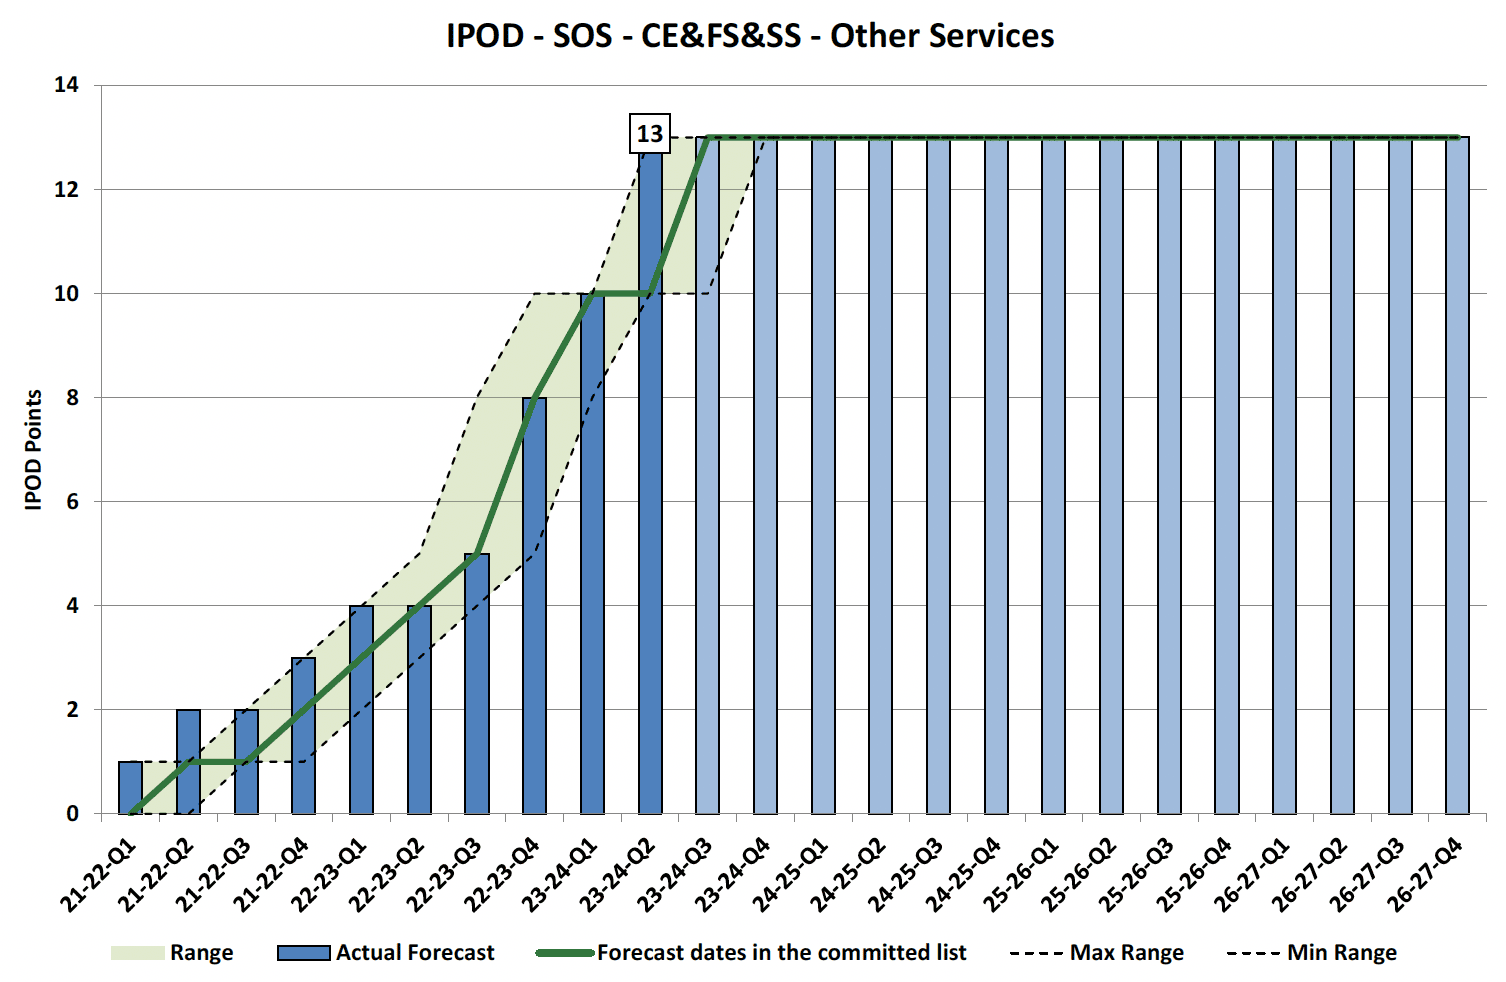 Chart showing IPOD points achieved or forecast for Start on Site milestone against target range for Other Services Projects in CE&FS&SS Portfolio